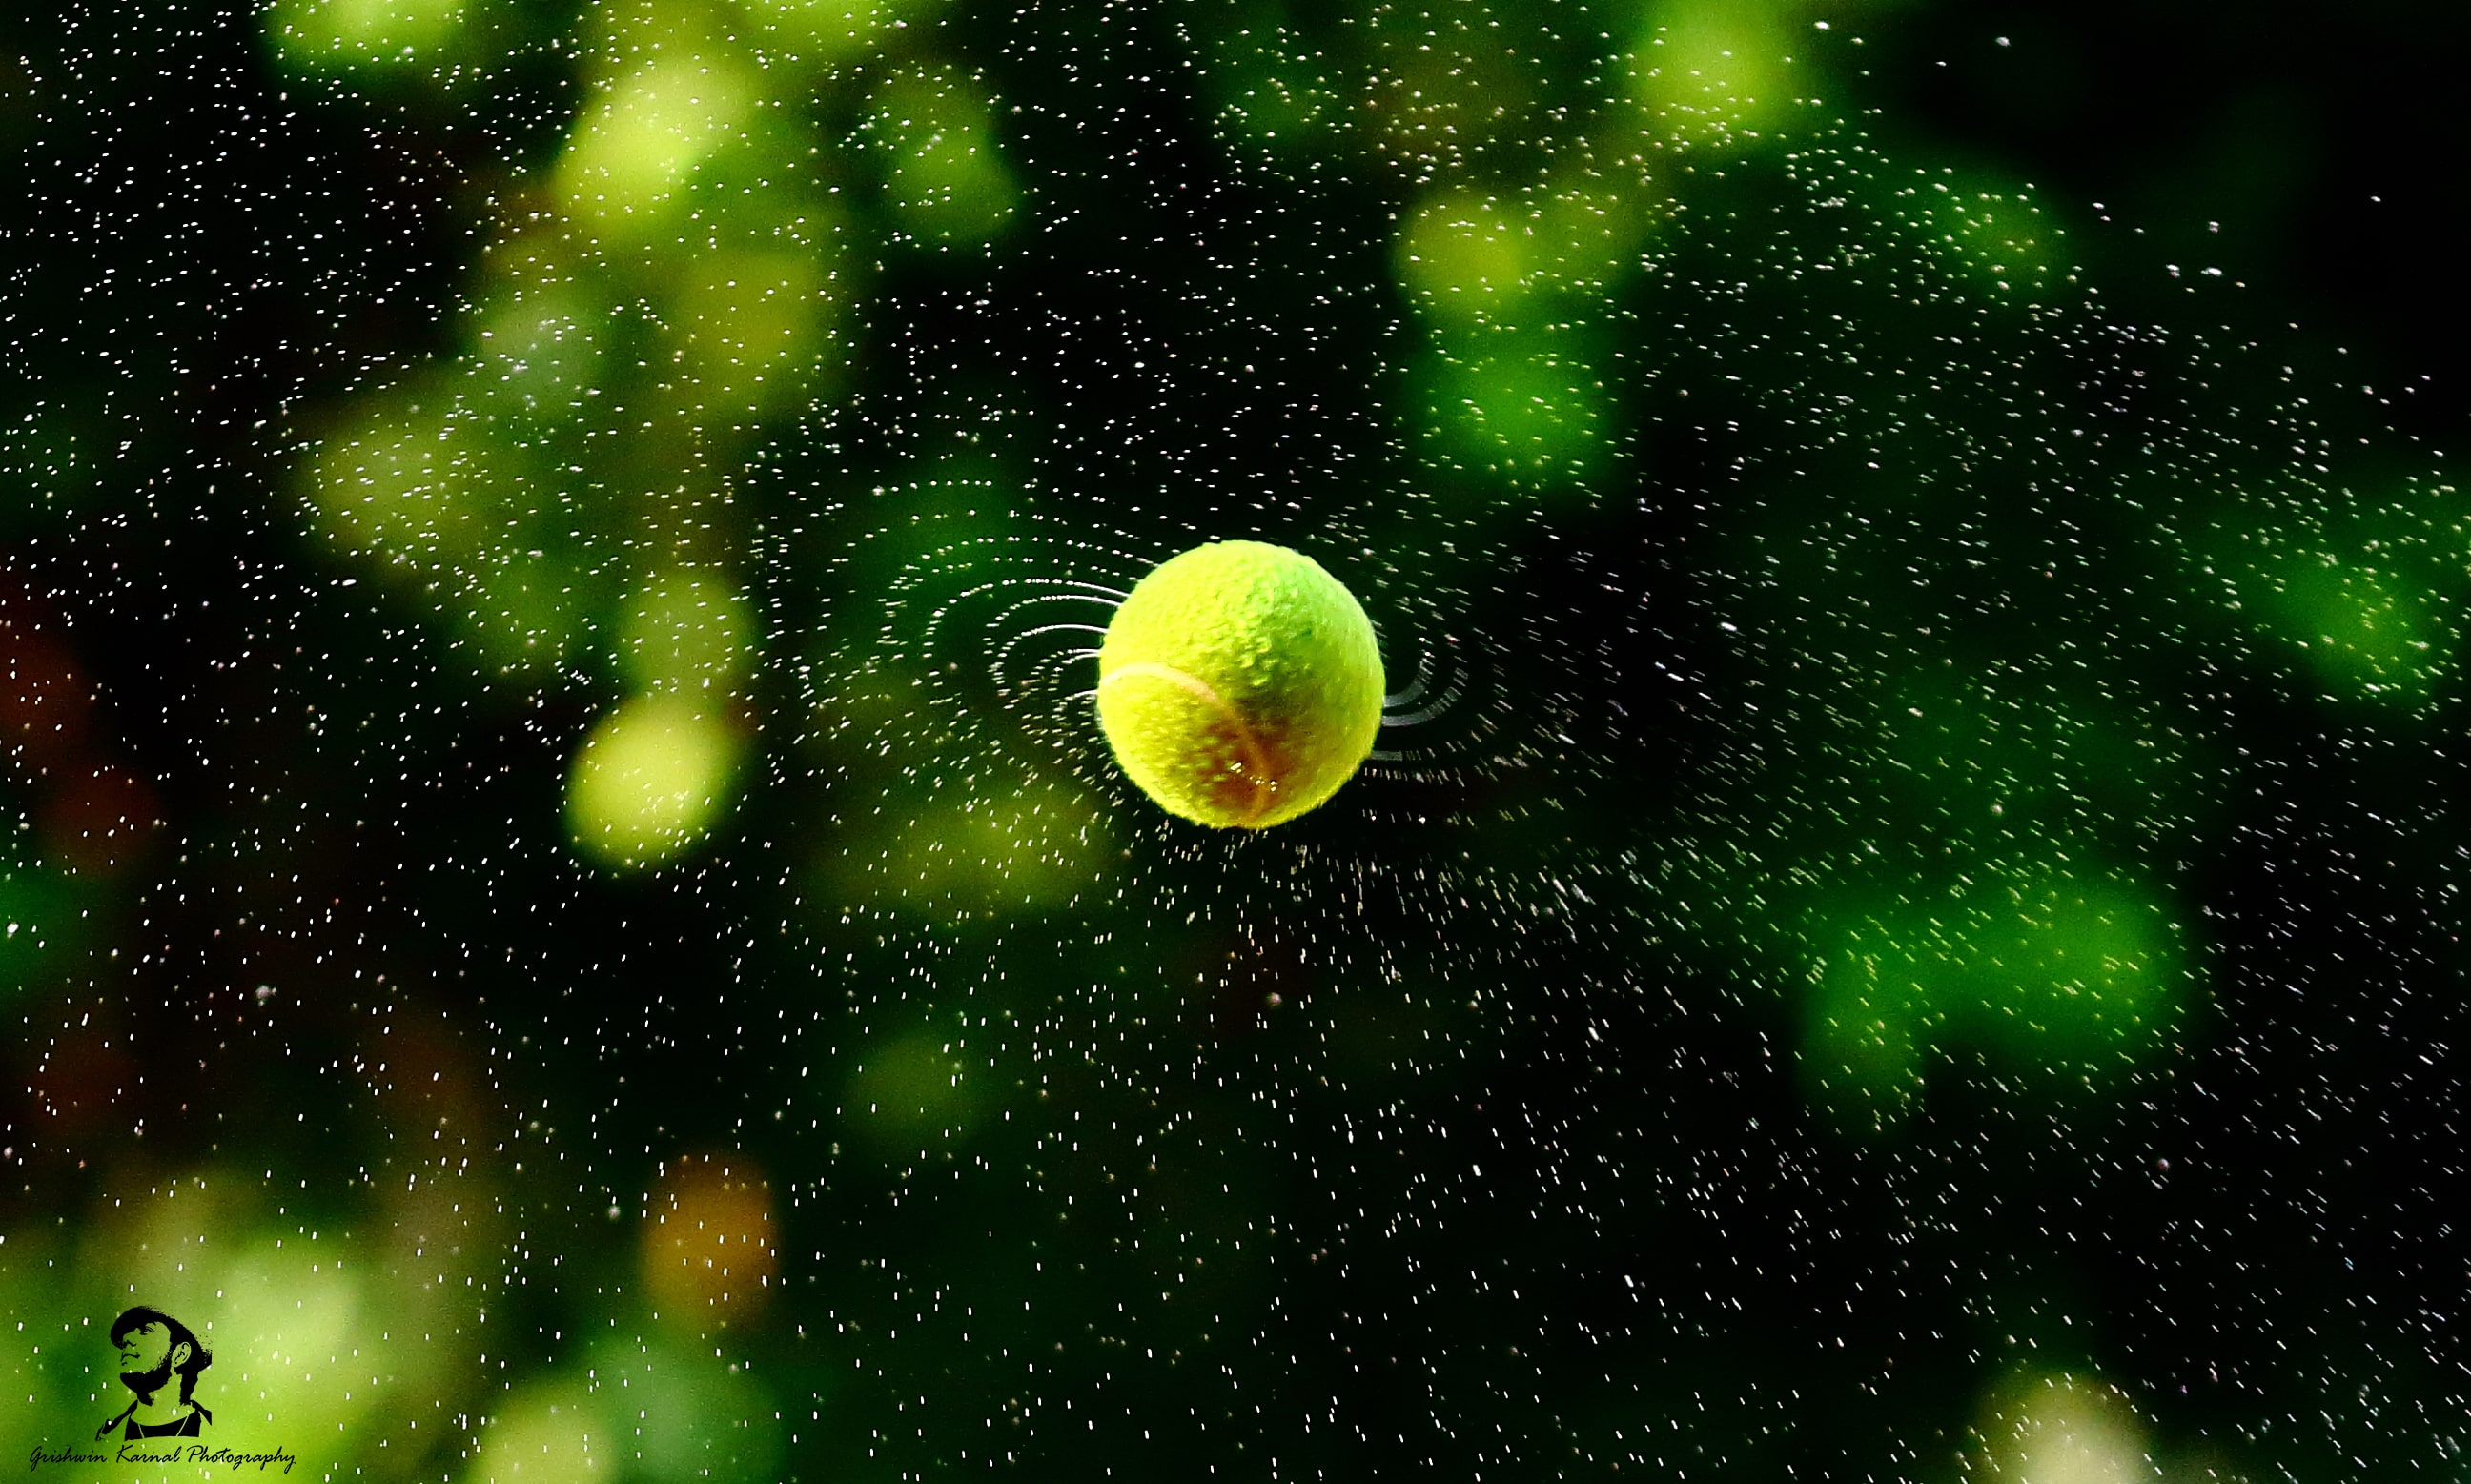 tennis ball which resembles the Galaxy